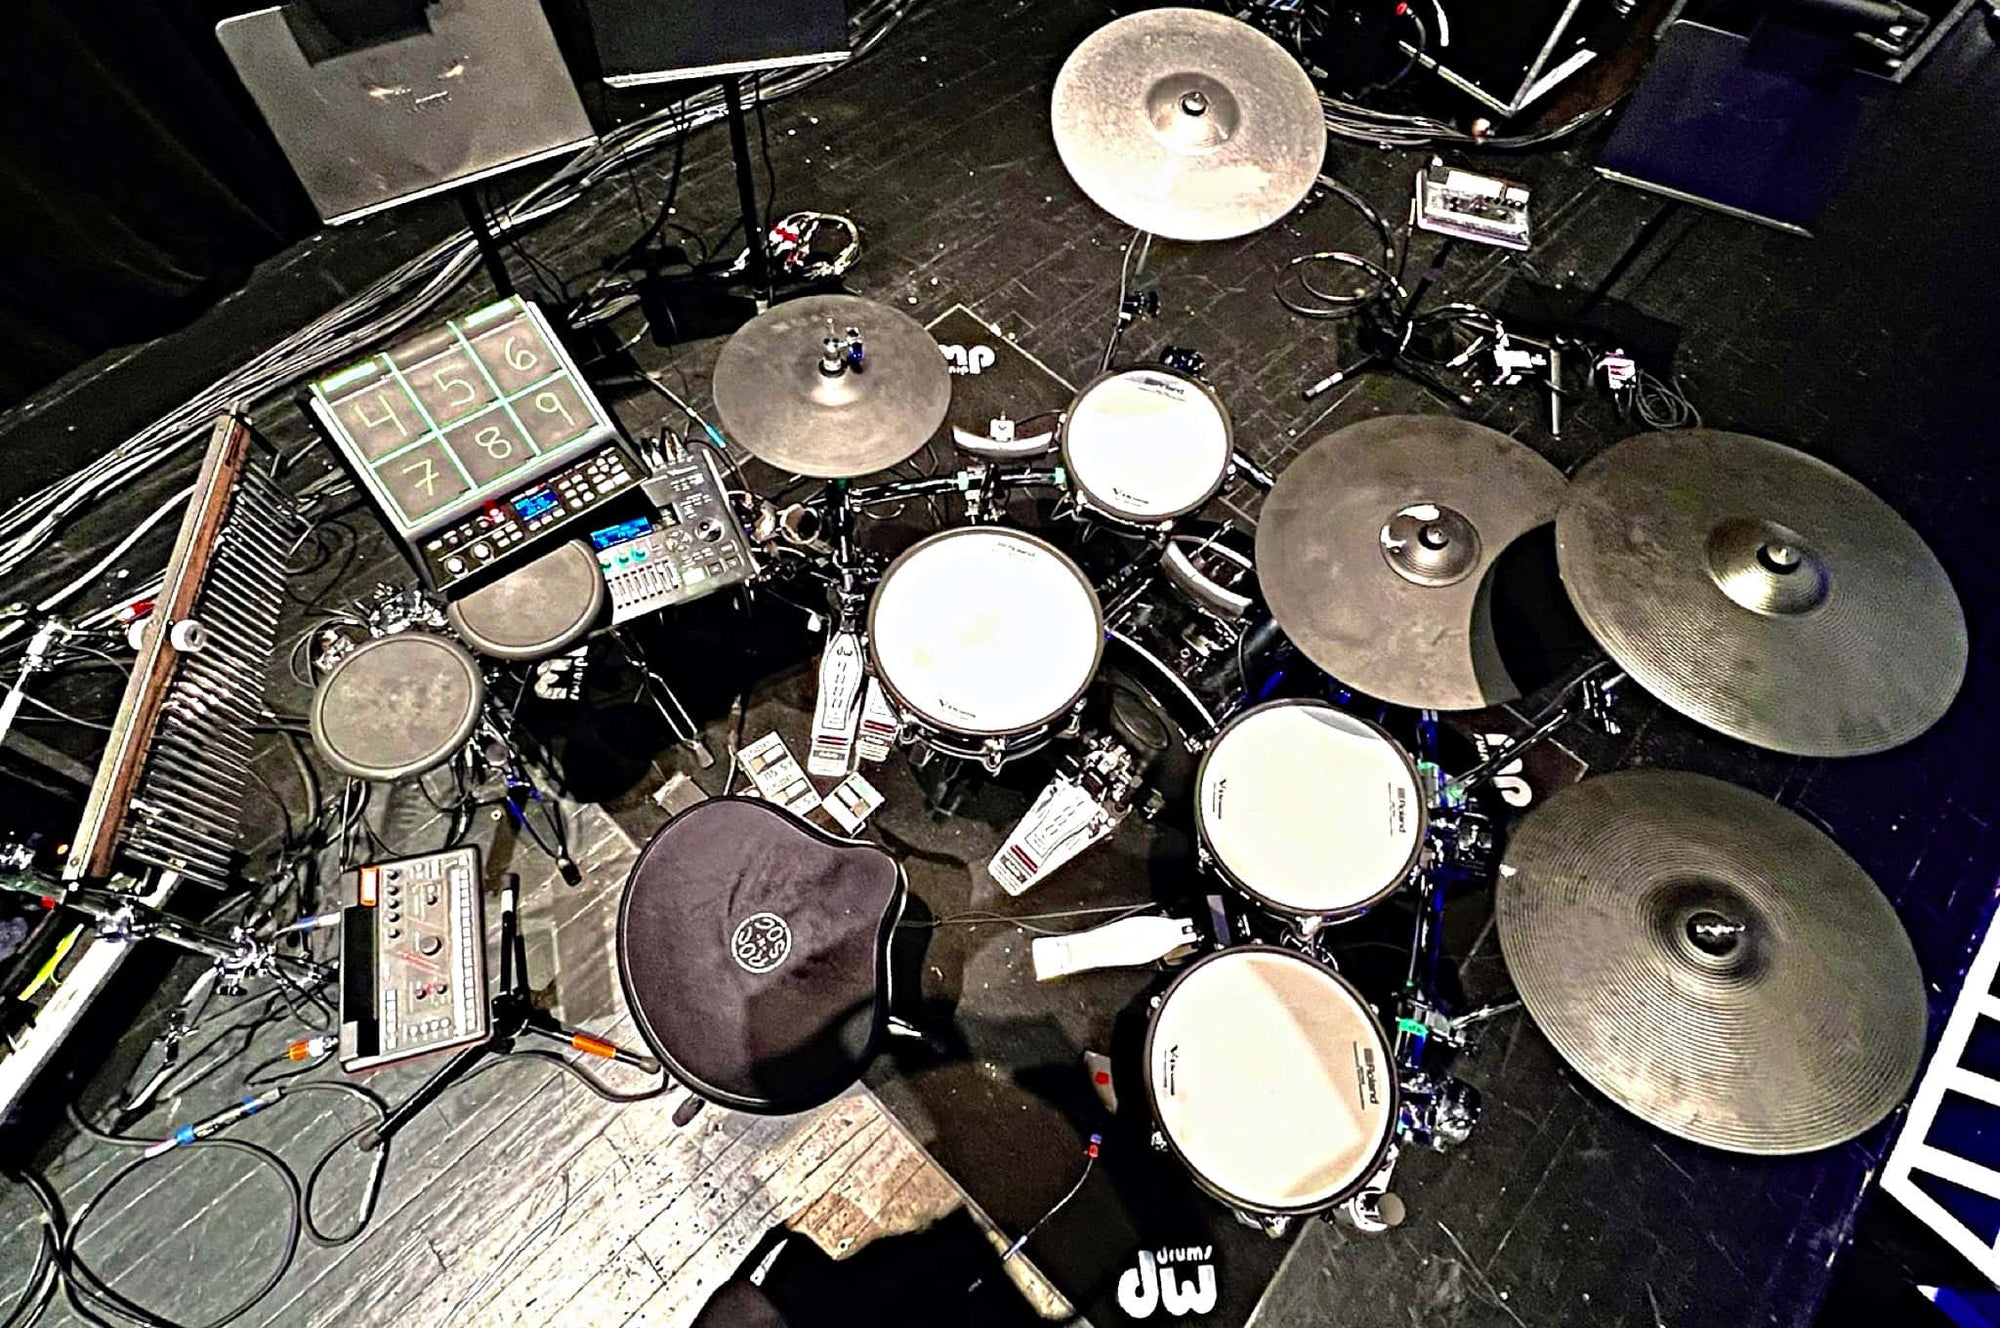 Kevin McNaughton's setup for the National Tour of Pretty Woman at the Old National Centre (formerly the Murat Theatre) in Indianapolis, Indiana.